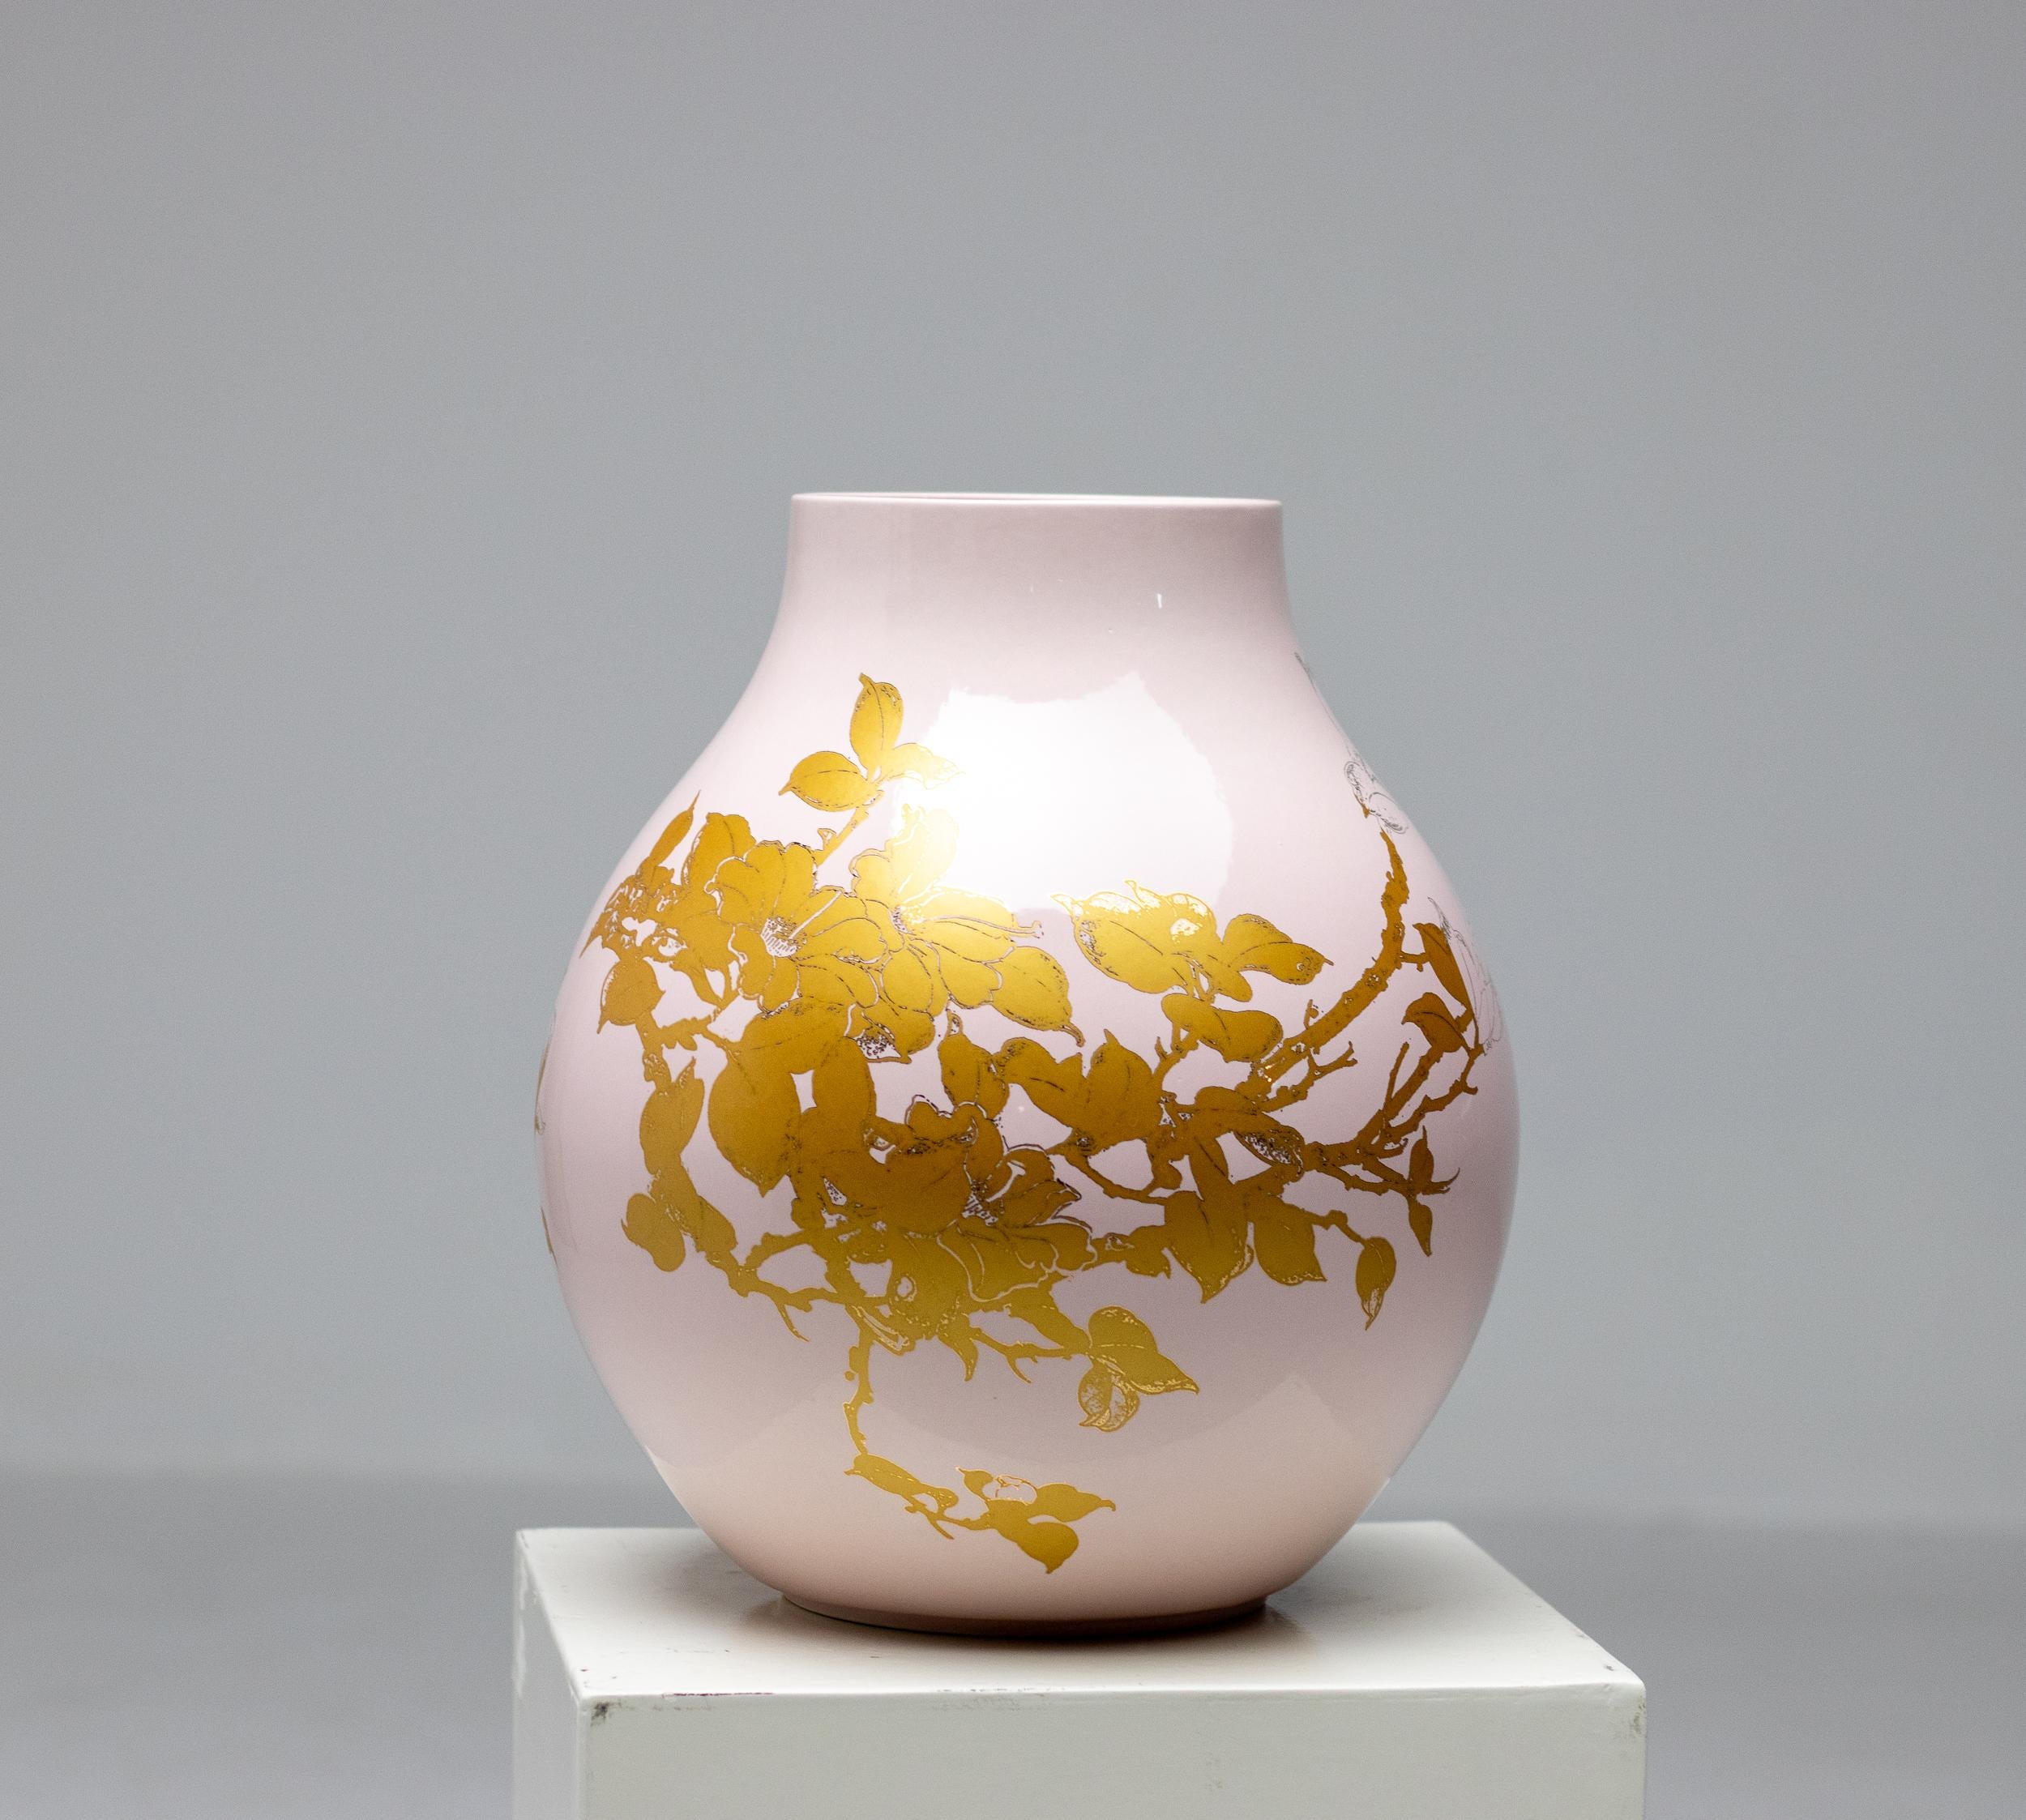 Limited edition Hella Jongerius Pink & Gold Vase of the 2005 PS Jonsberg Collection for Ikea.
This vase is semi-handmade and is included in many museum collections, including Hertogenbosch from the Stedelijk Museum and Stedelijk Museum Amsterdam. It